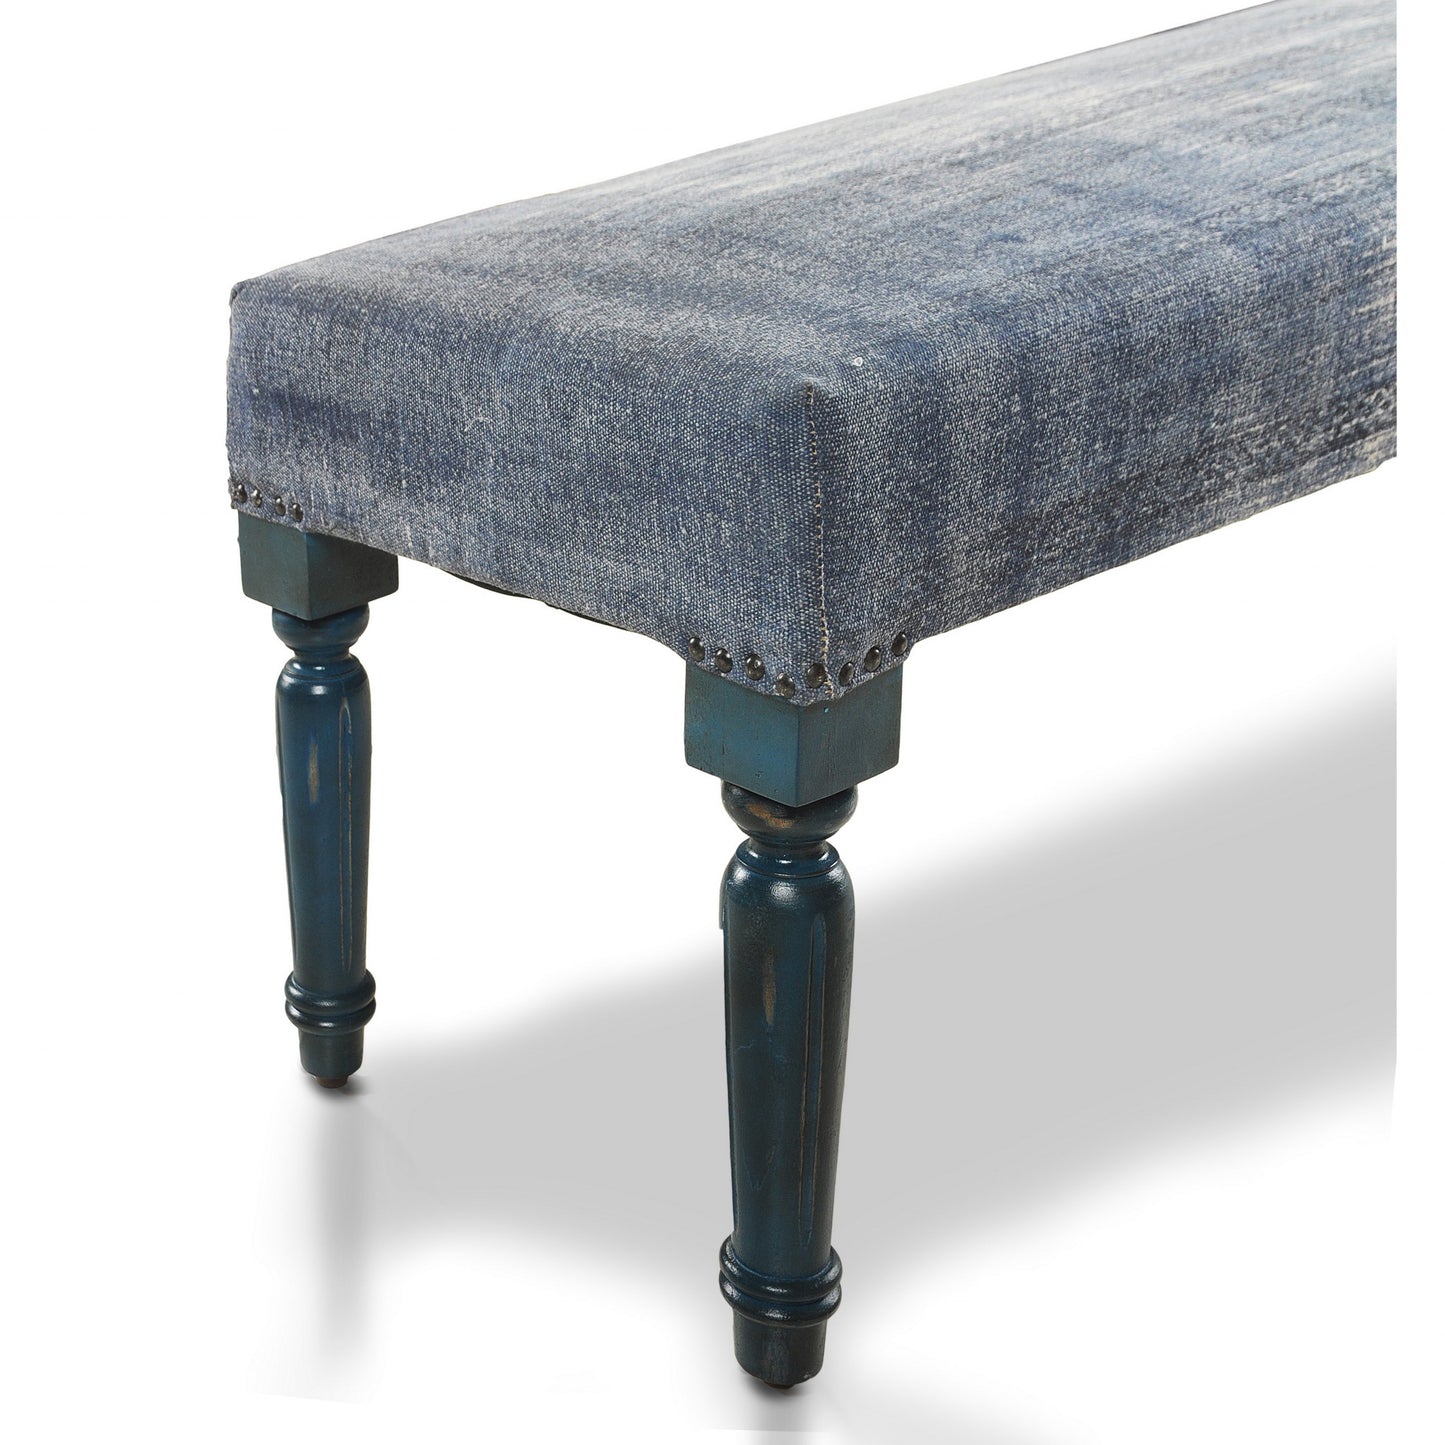 47" Blue And Cream Abstract Design Blue Leg Upholstered Bench